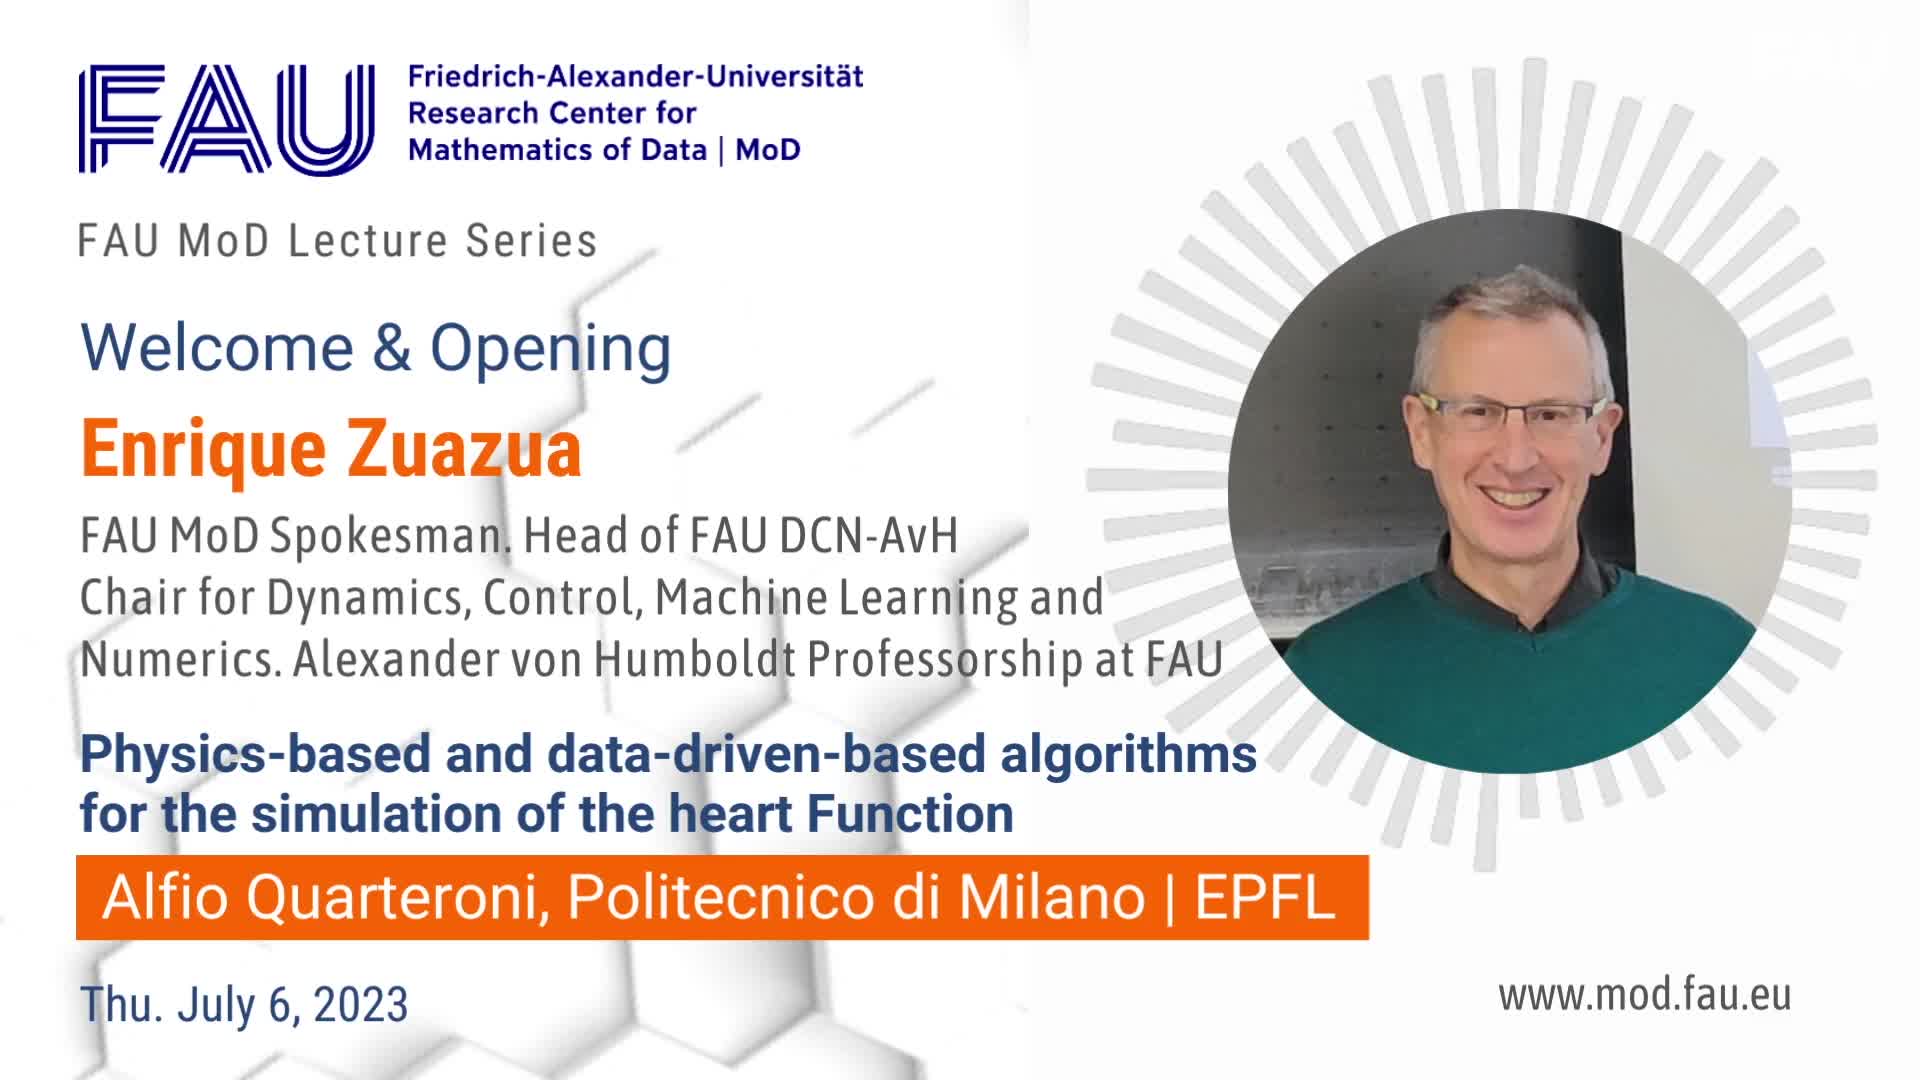 FAU MoD Lecture: Physics-Based and Data-Driven-Based Algorithms for the Simulation of the Heart Function preview image